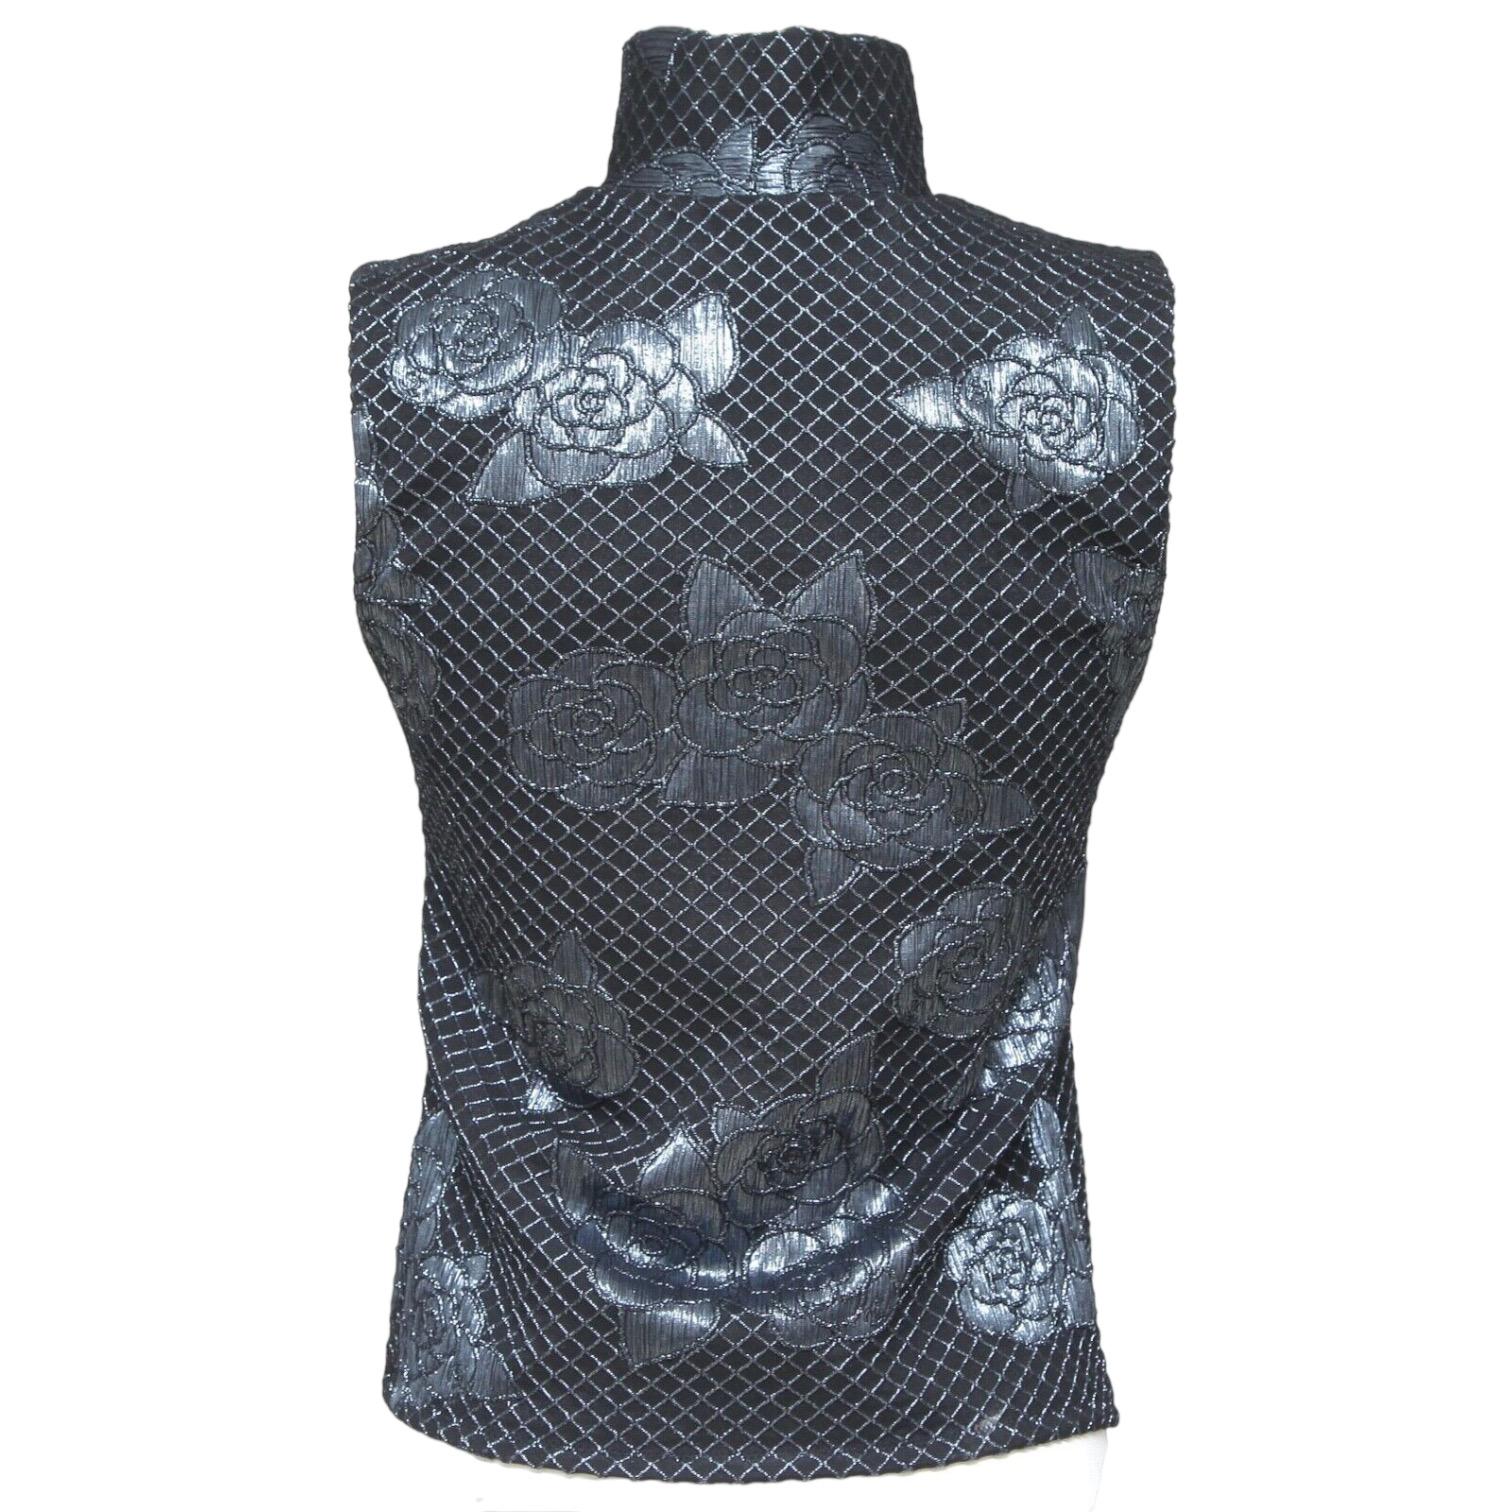 CHANEL Sleeveless Top Blouse Metallic Navy Blue Floral Zipper Sz 36 2017 BNWT In New Condition For Sale In Hollywood, FL